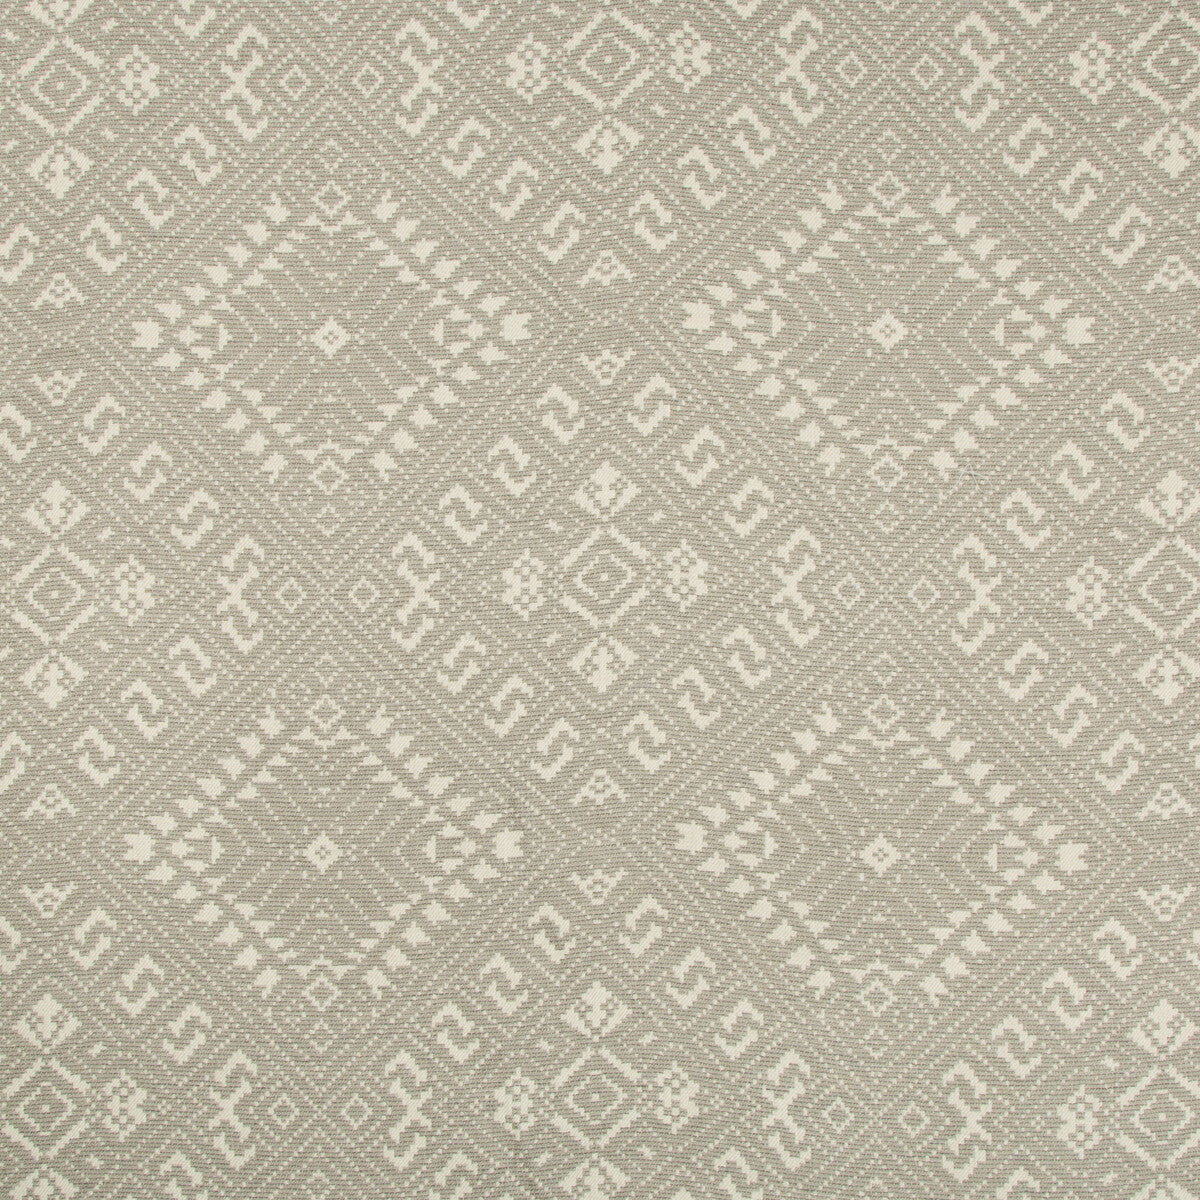 Penang fabric in stone color - pattern 34875.11.0 - by Kravet Design in the Oceania Indoor Outdoor collection